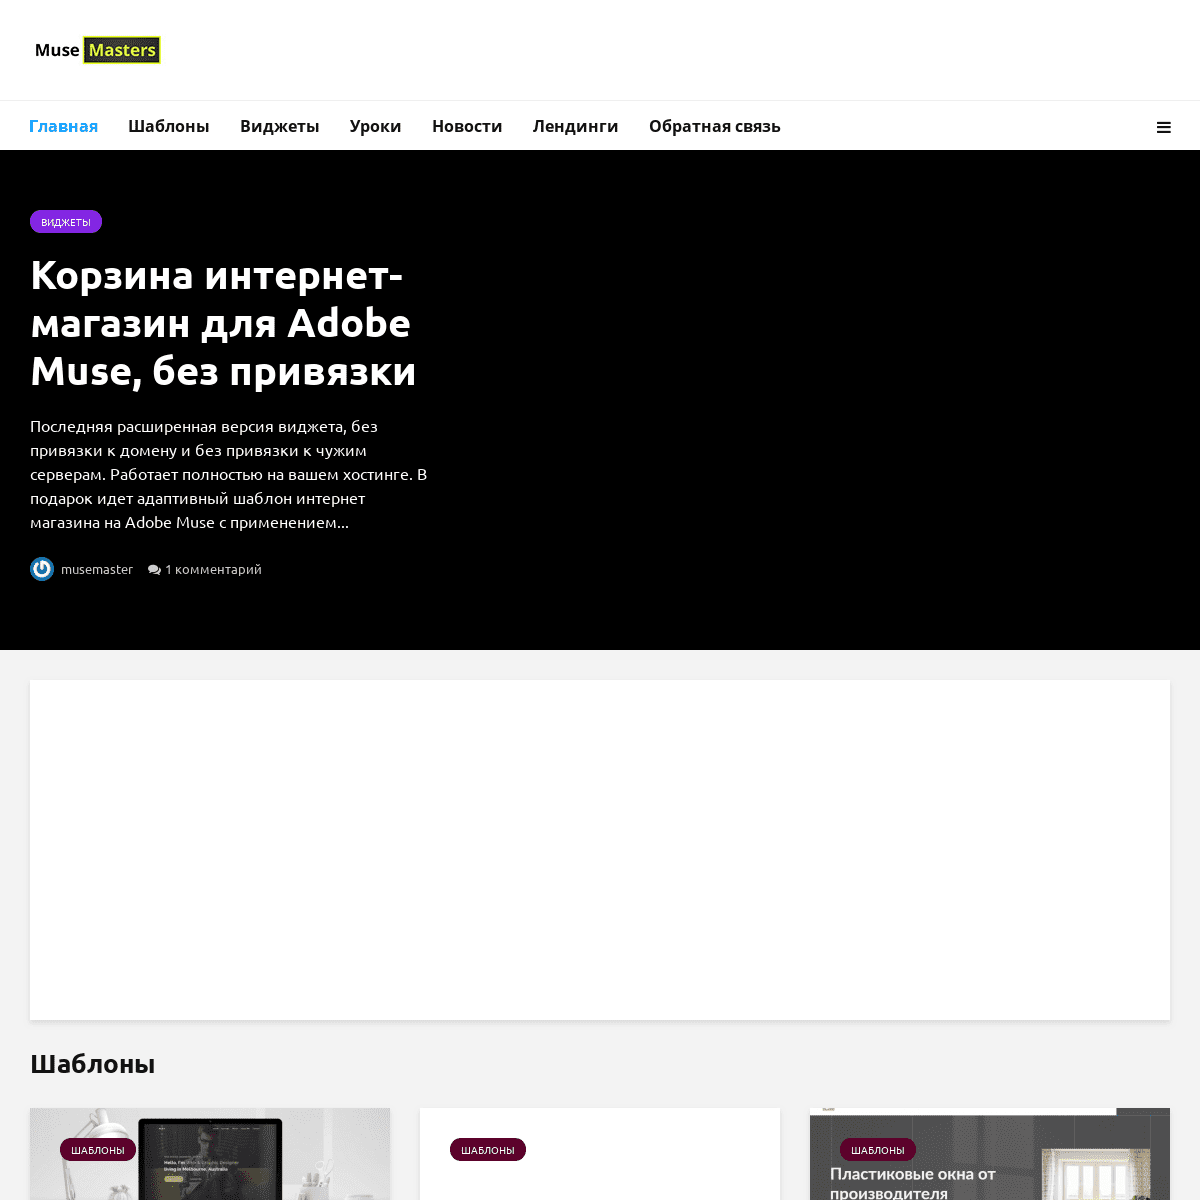 A complete backup of muse-masters.ru